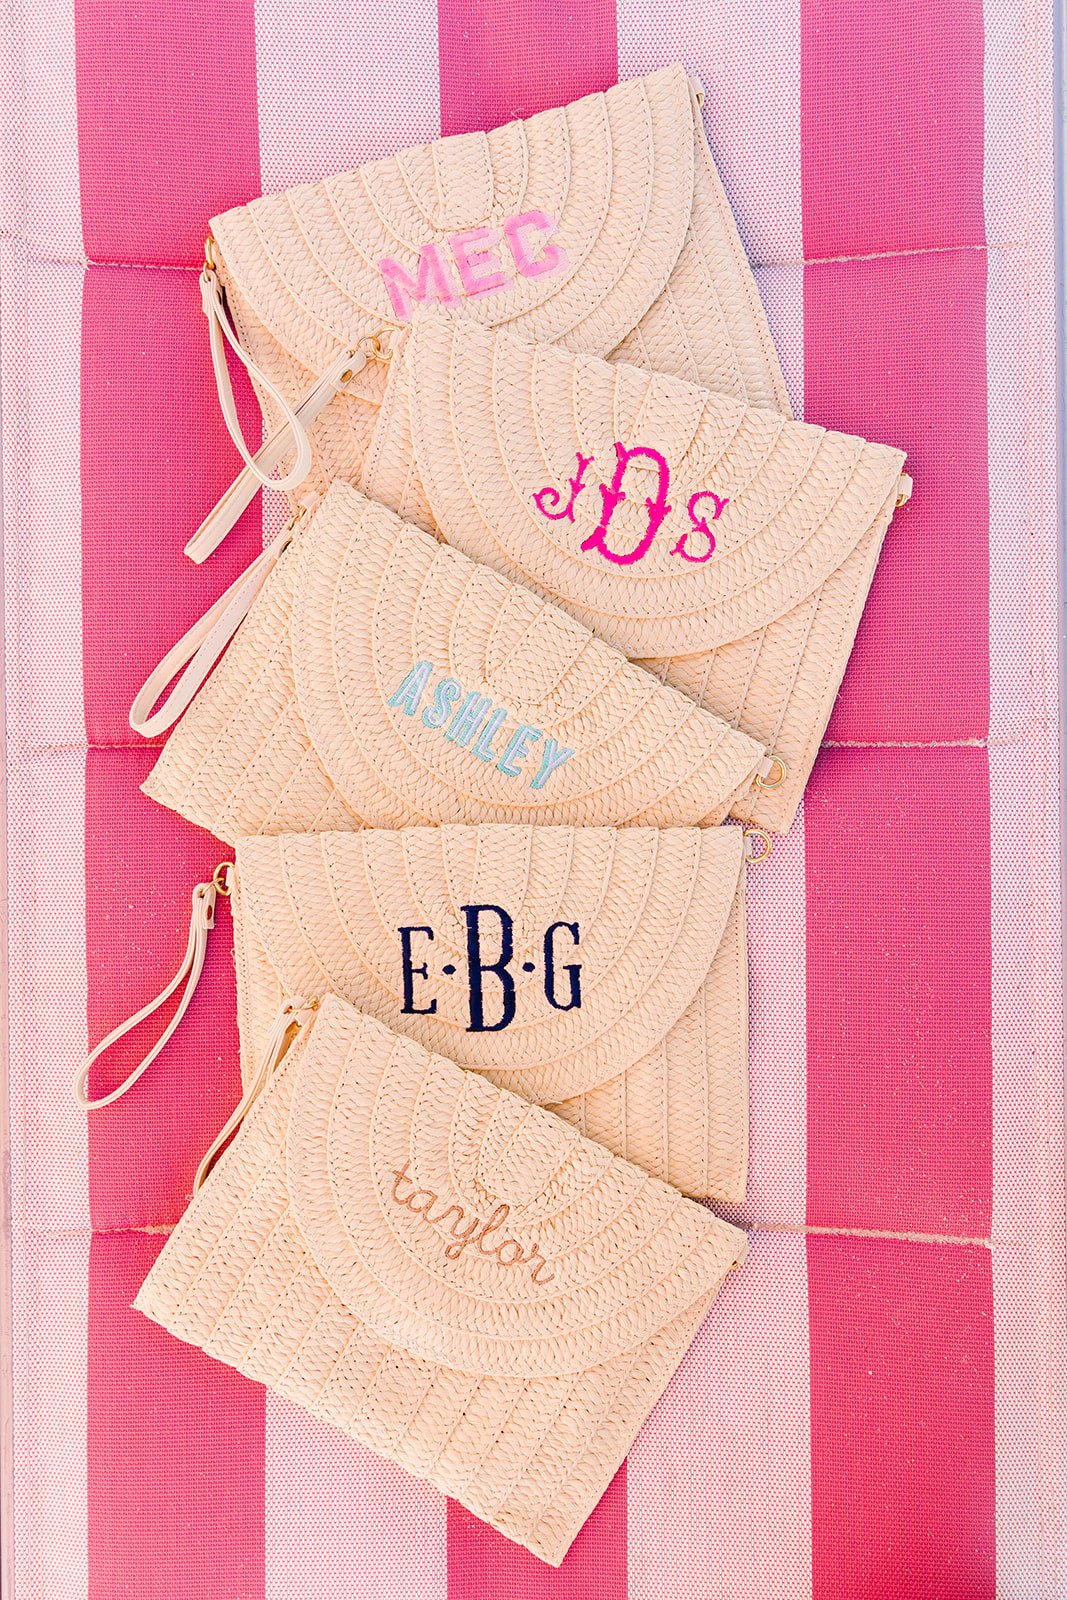  Monogrammed Clutch Bags For Women, Personalized Gift